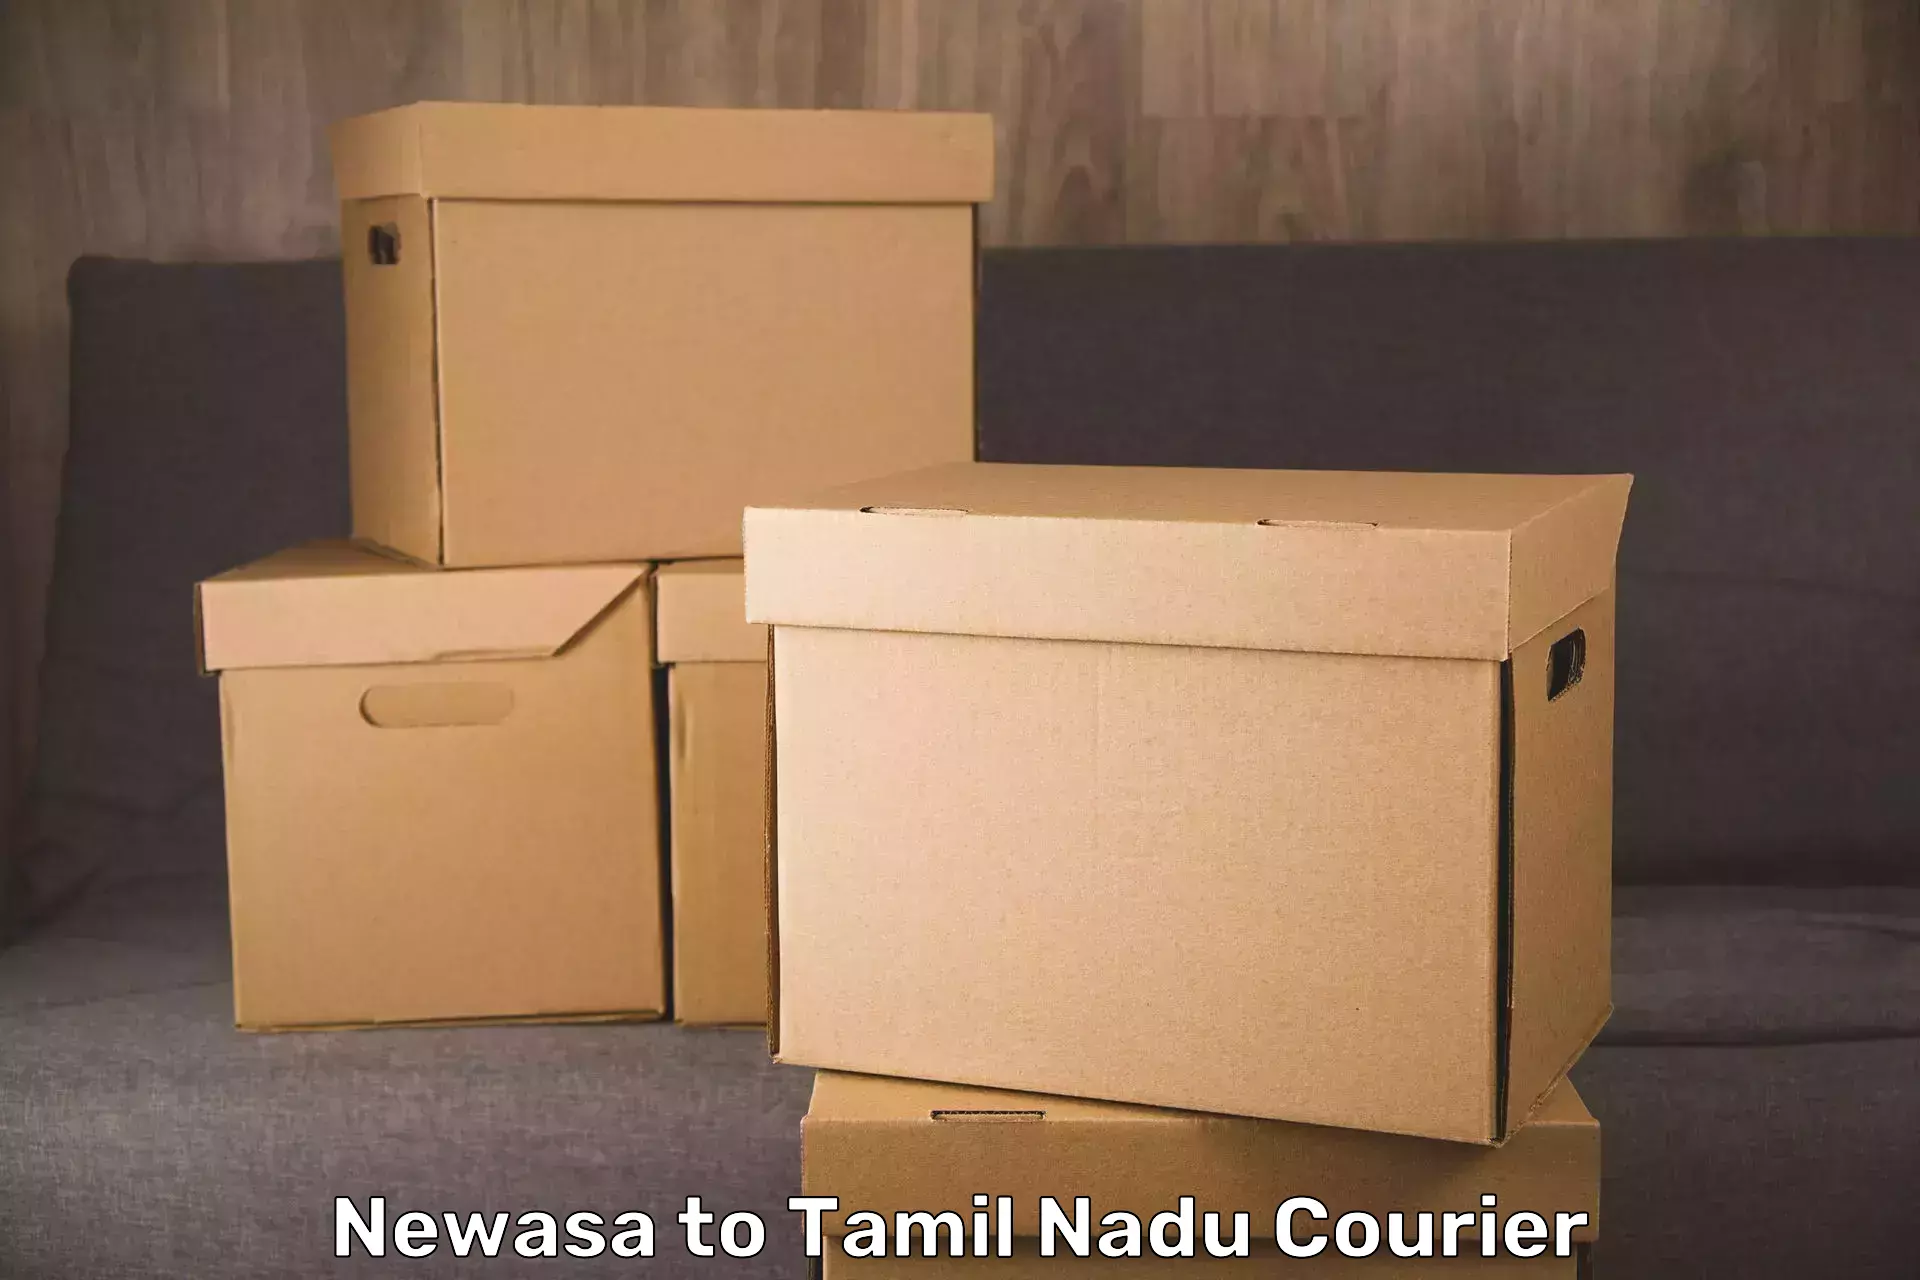 Luggage shipment tracking Newasa to Shanmugha Arts Science Technology and Research Academy Thanjavur